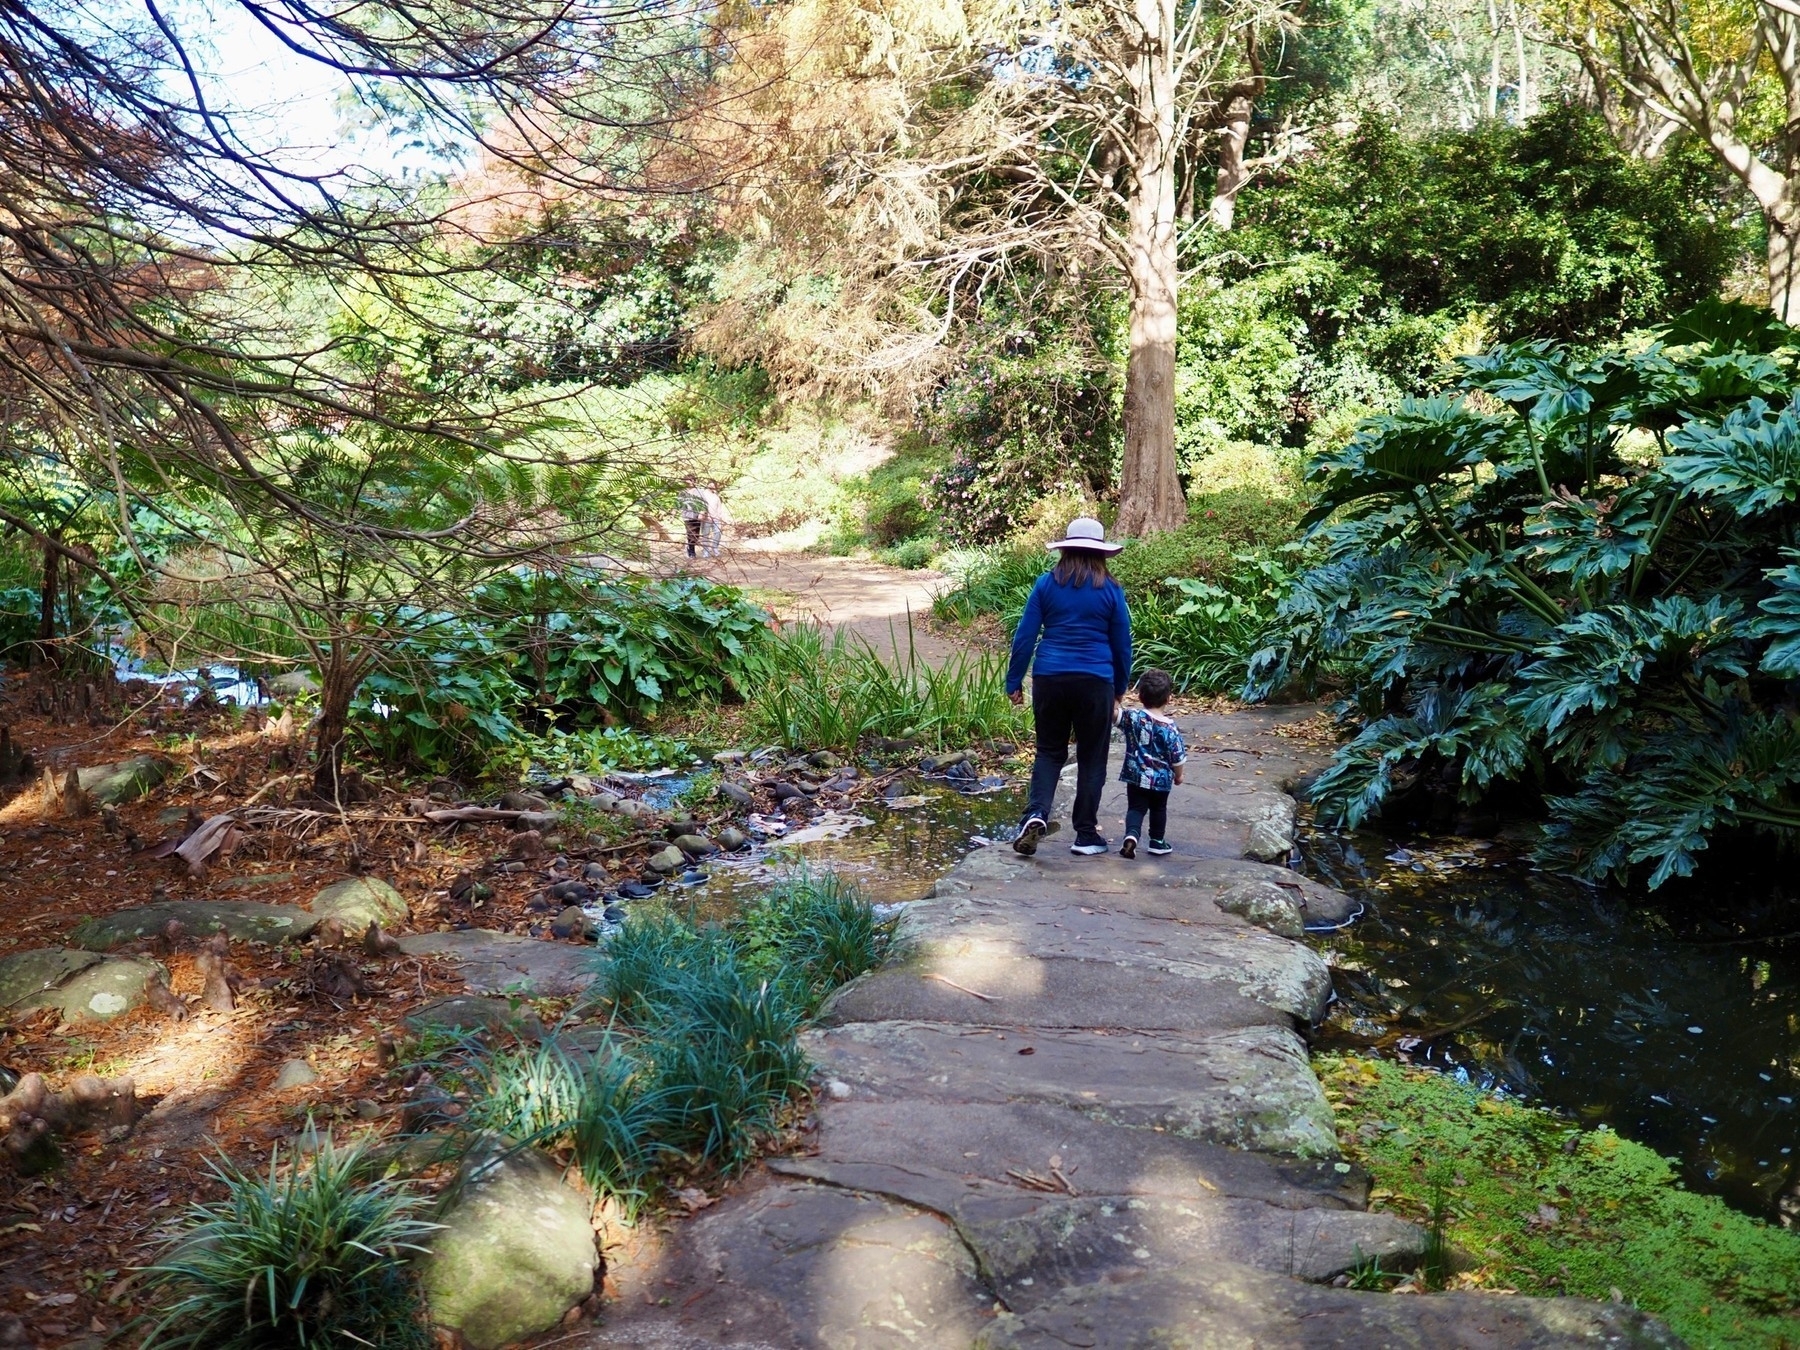 Grandmother and grandchild walking along a stone path through trees